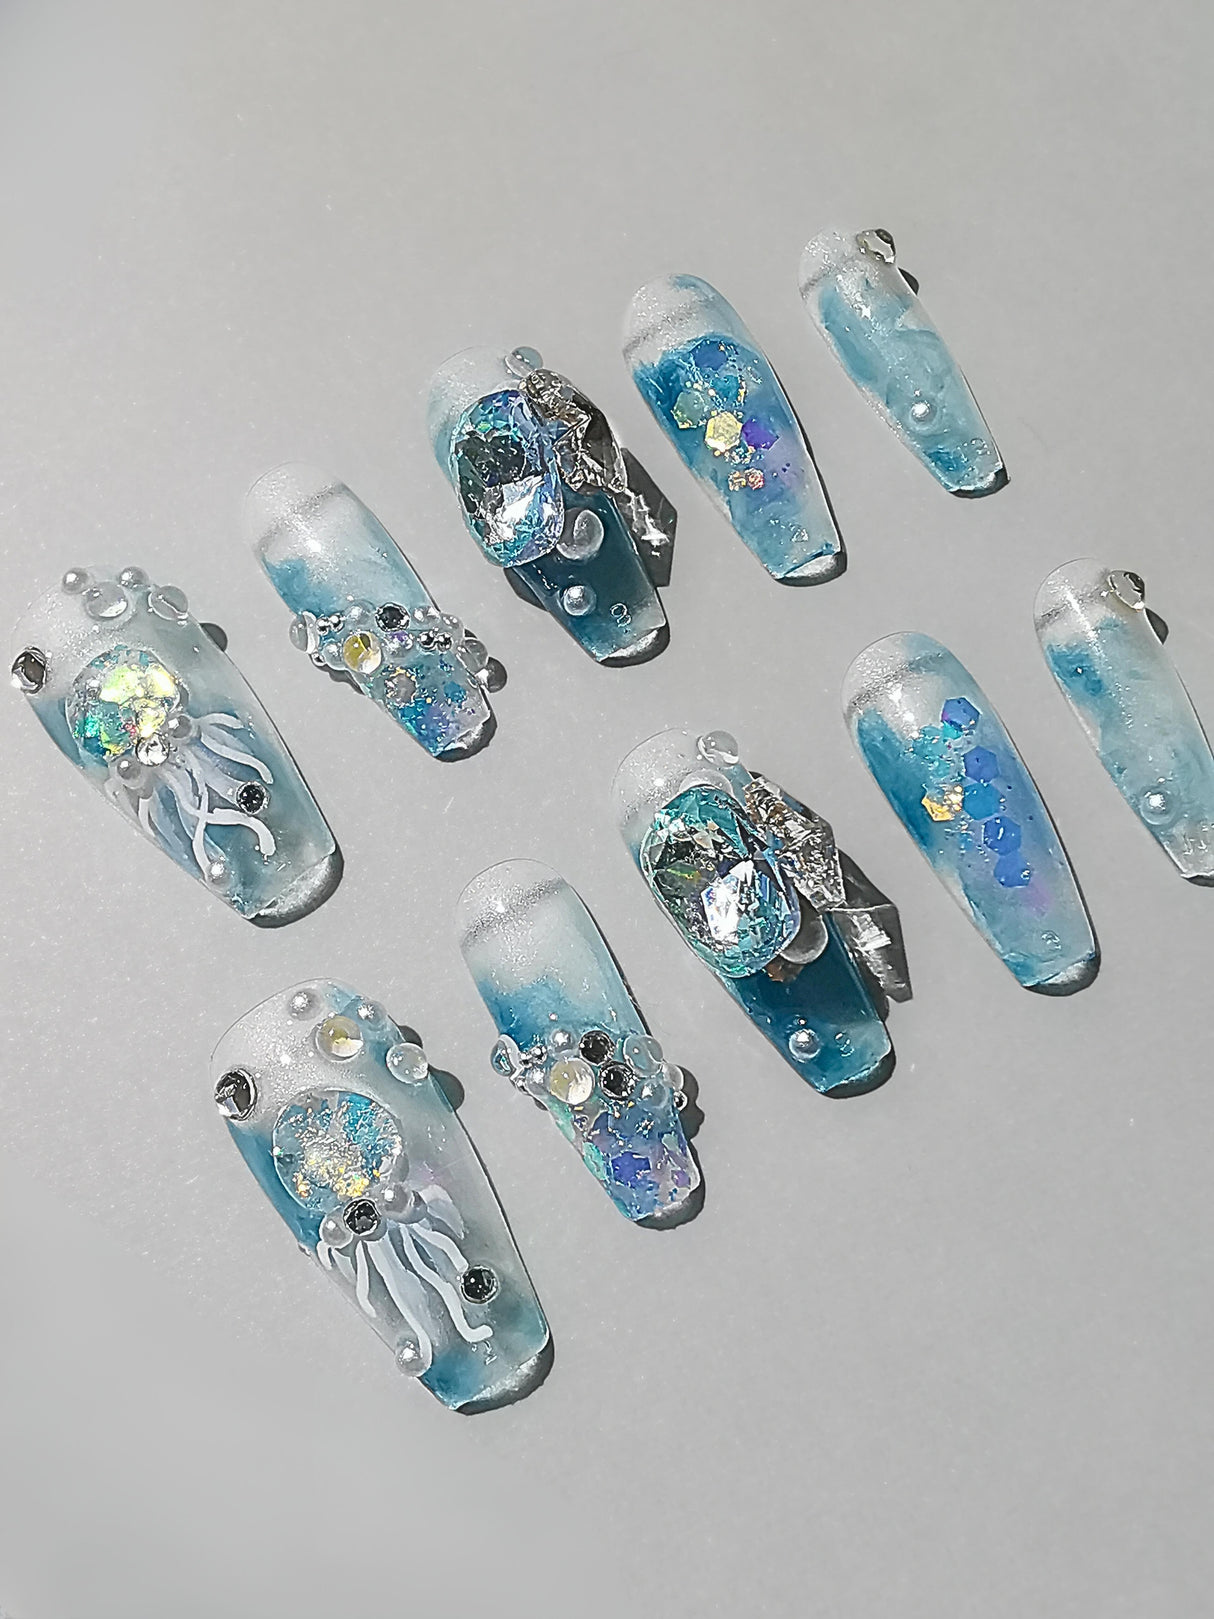 Add a winter wonderland touch to your manicure with these acrylic nail tips decorated with glitter, sequins, and diamonds resembling icy formations or snowflakes. 